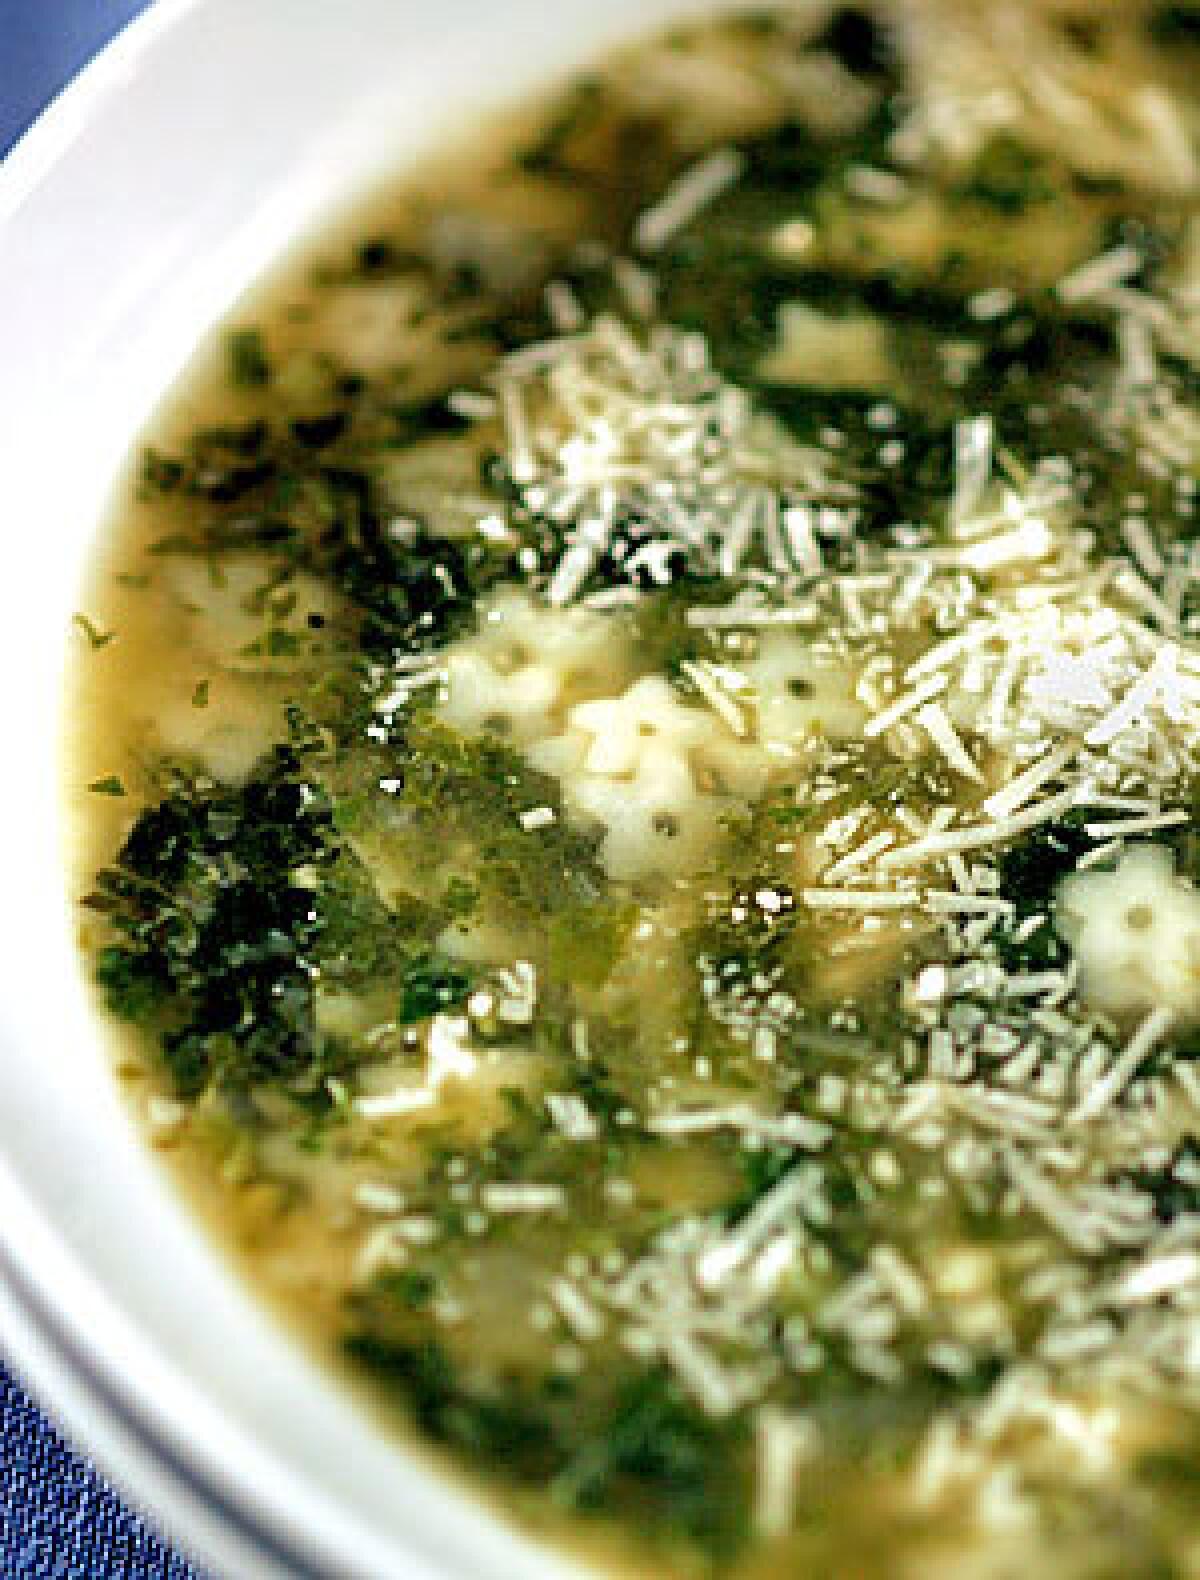 COMFORTING: A soup of mixed braised greens, with a bit of vinegar and grated Parmesan, is a good first course.